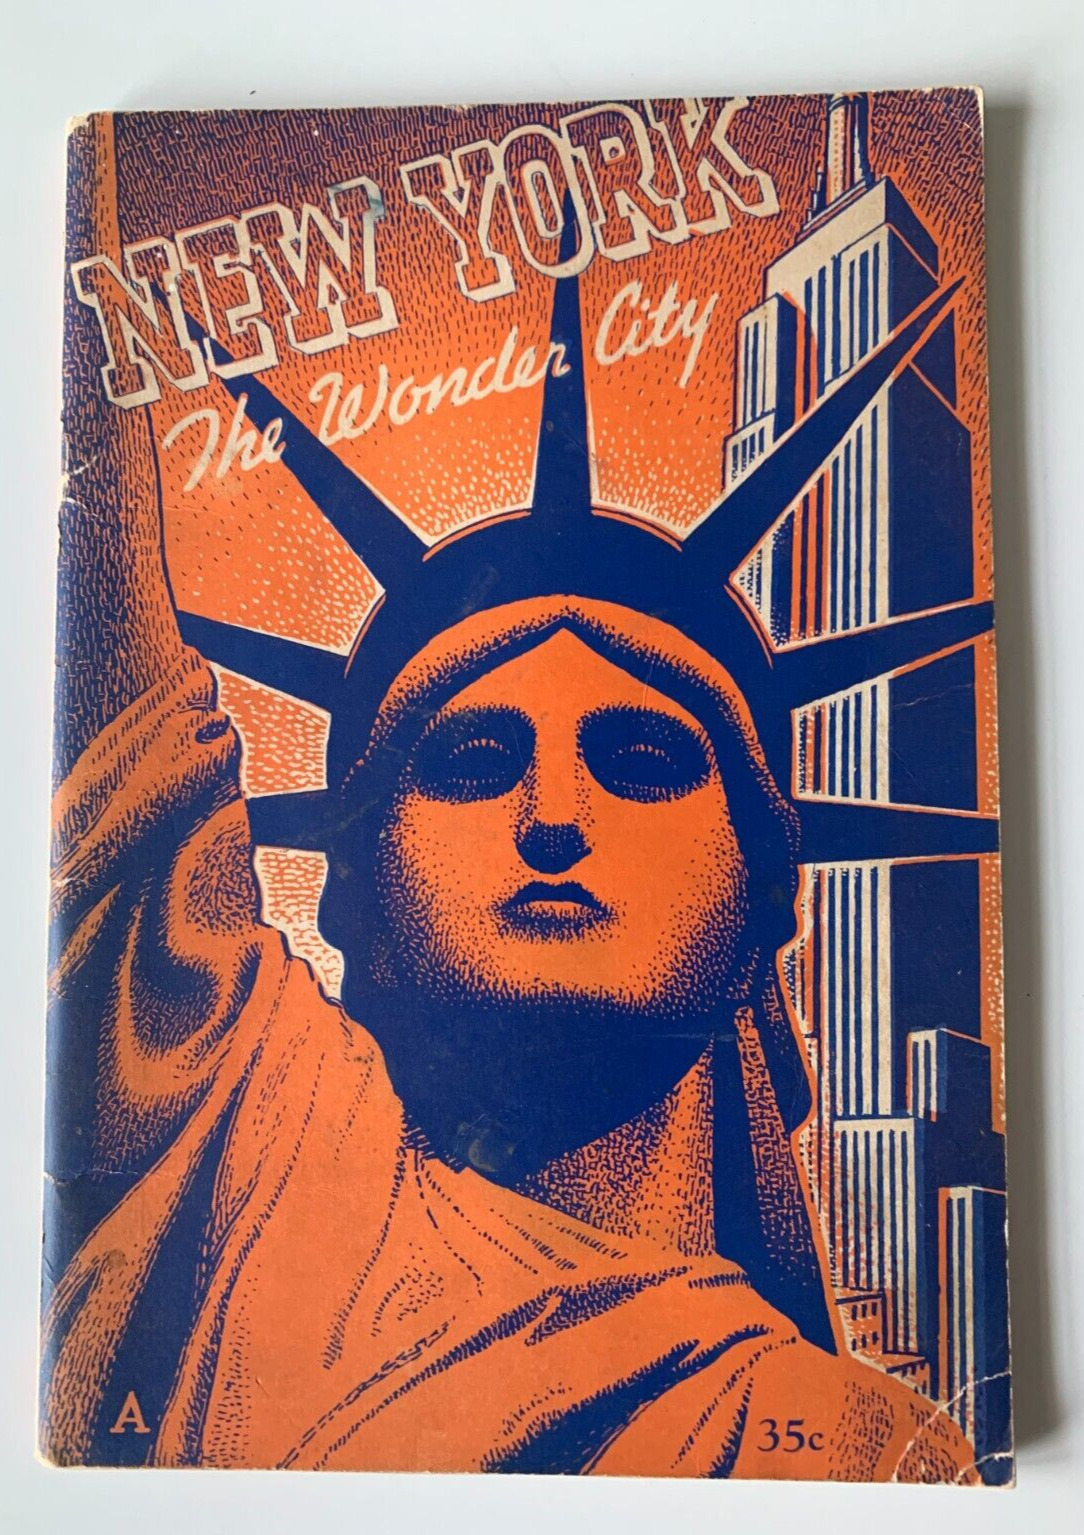 ca 1940s New York The Wonder City Illustrated Souvenir book booklet vintage NYC